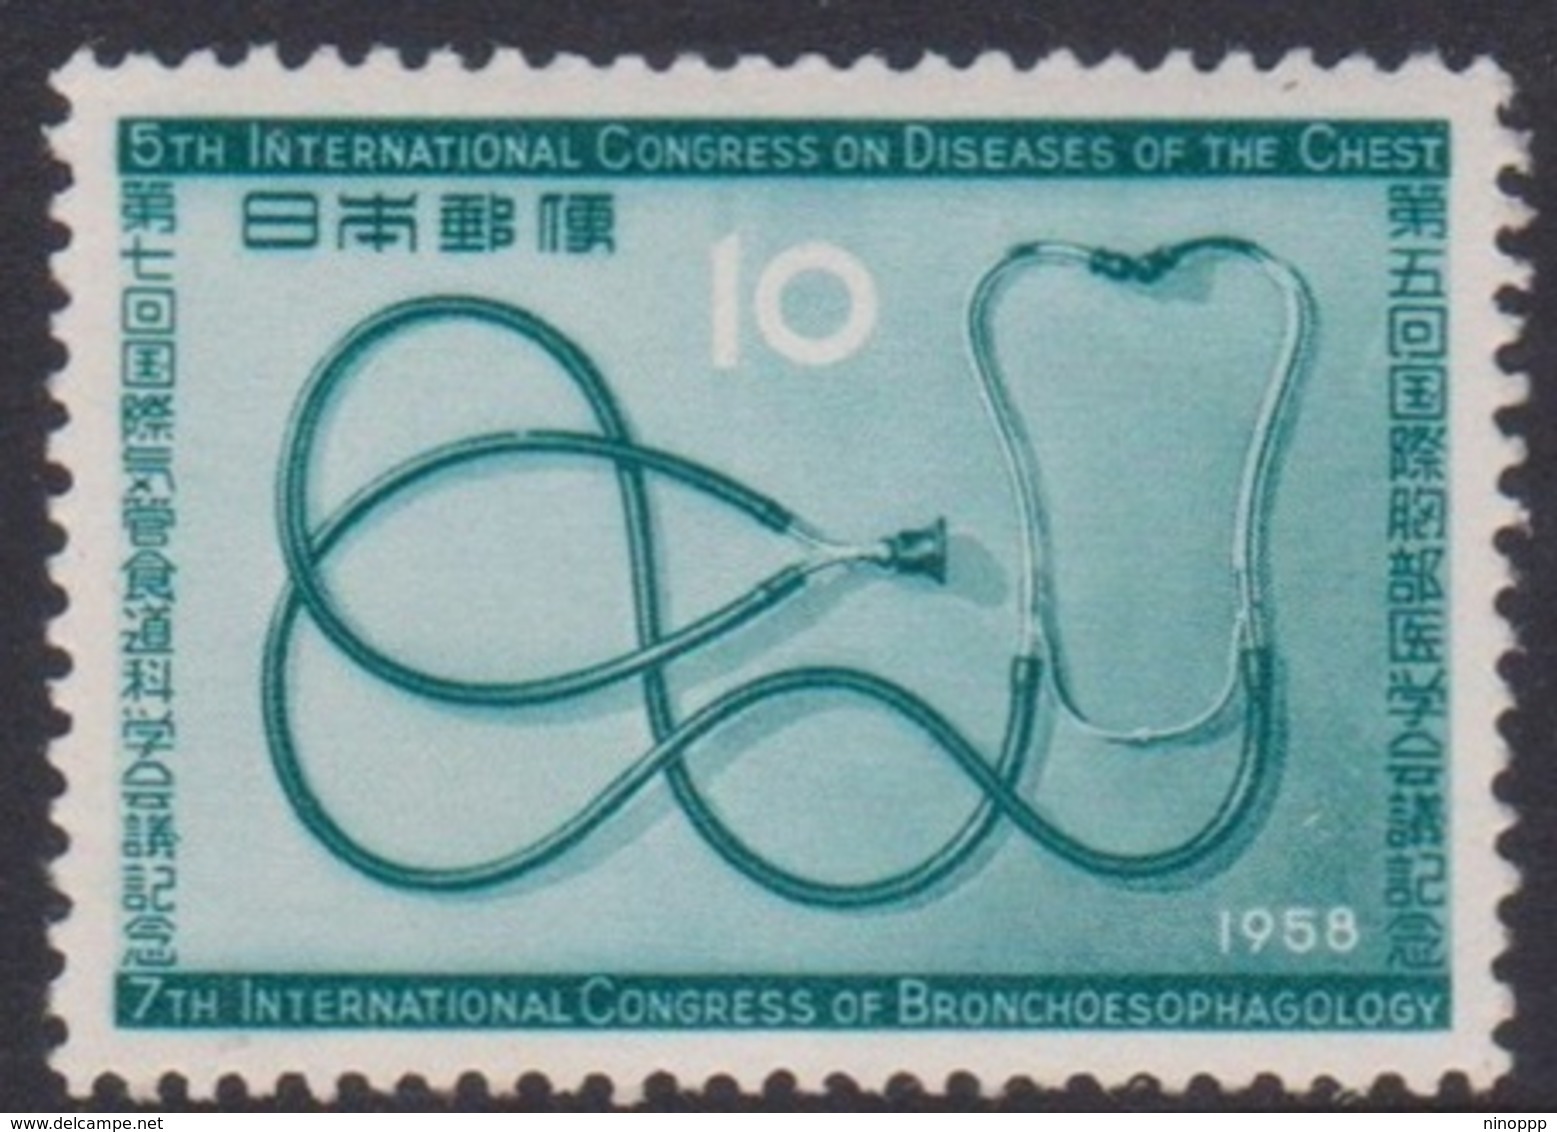 Japan SG785 1958 International Congress Of Chest Deseases, Mint Never Hinged - Unused Stamps